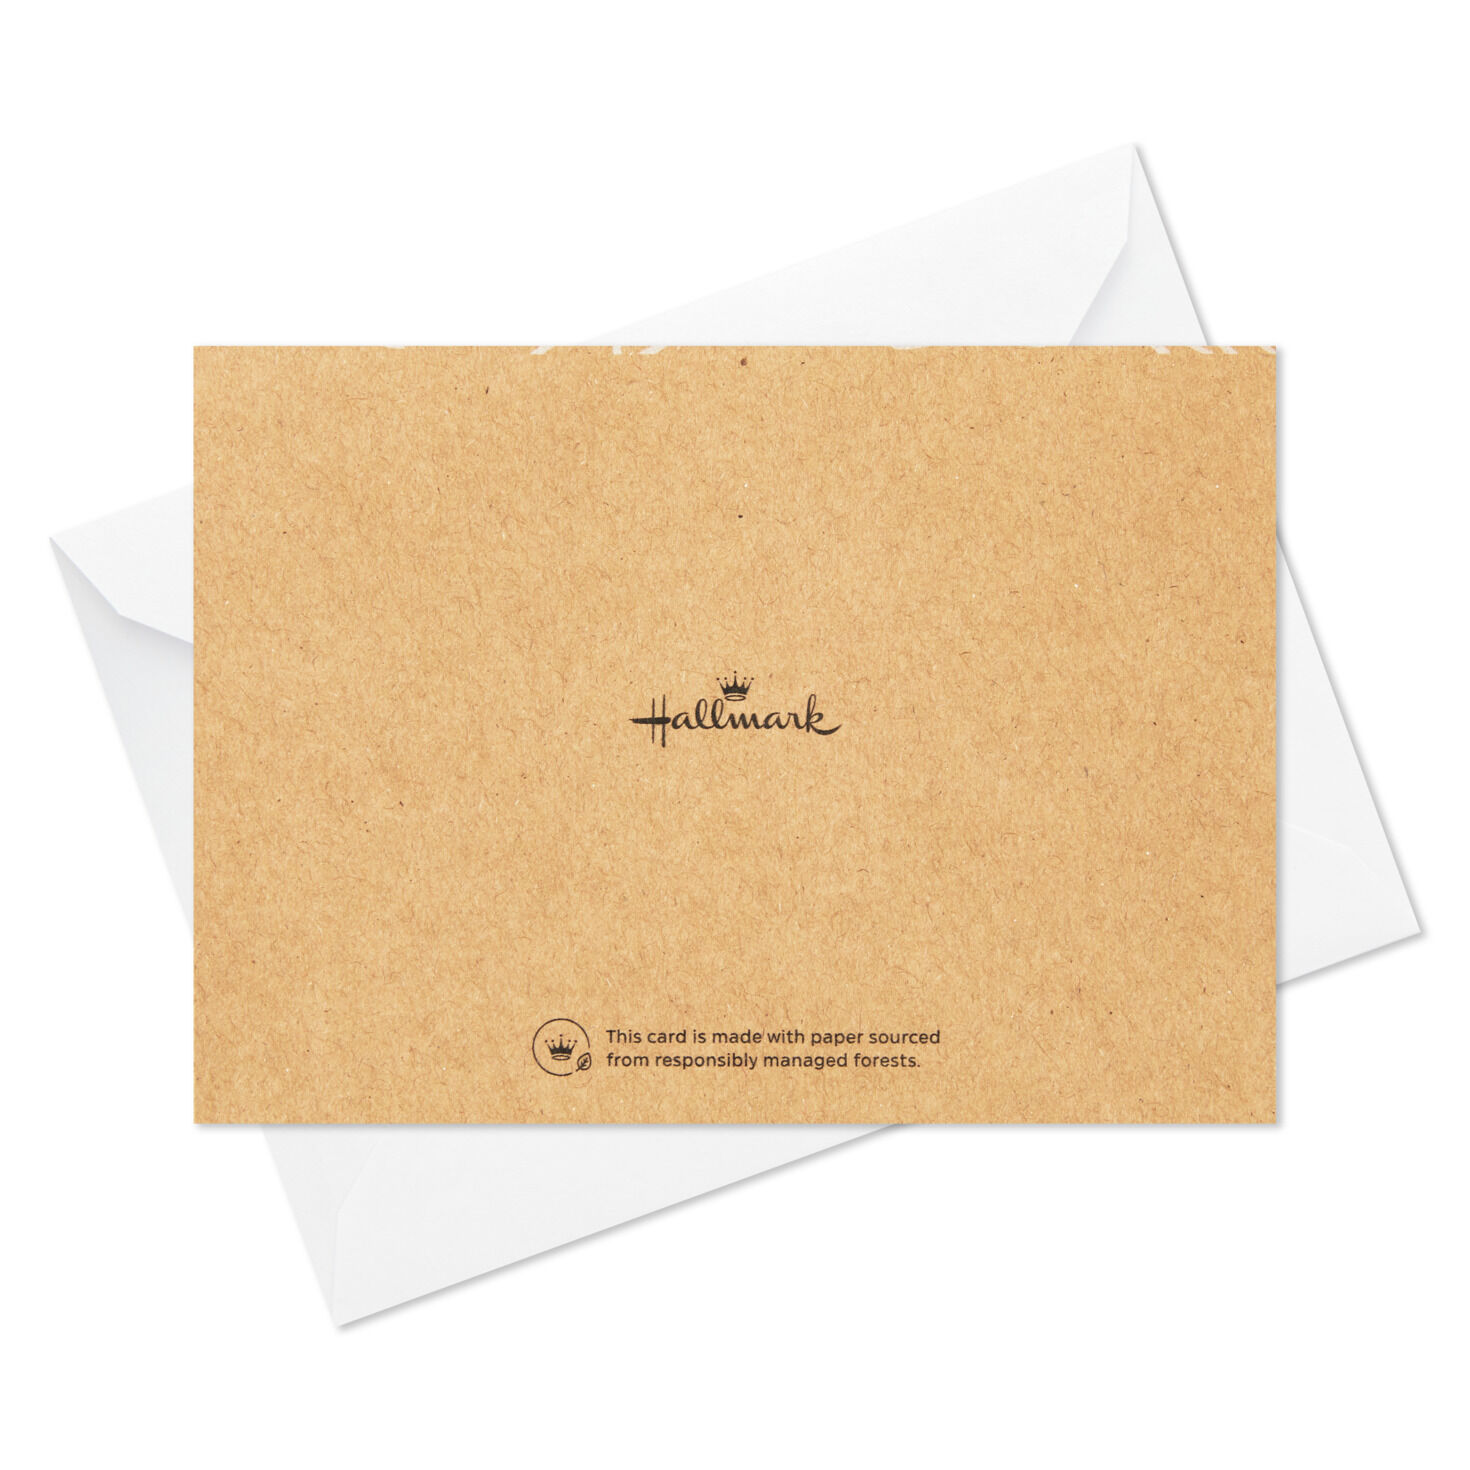 Rustic Floral Boxed Blank Thank-You Notes Assortment, Pack of 48 for only USD 12.99 | Hallmark